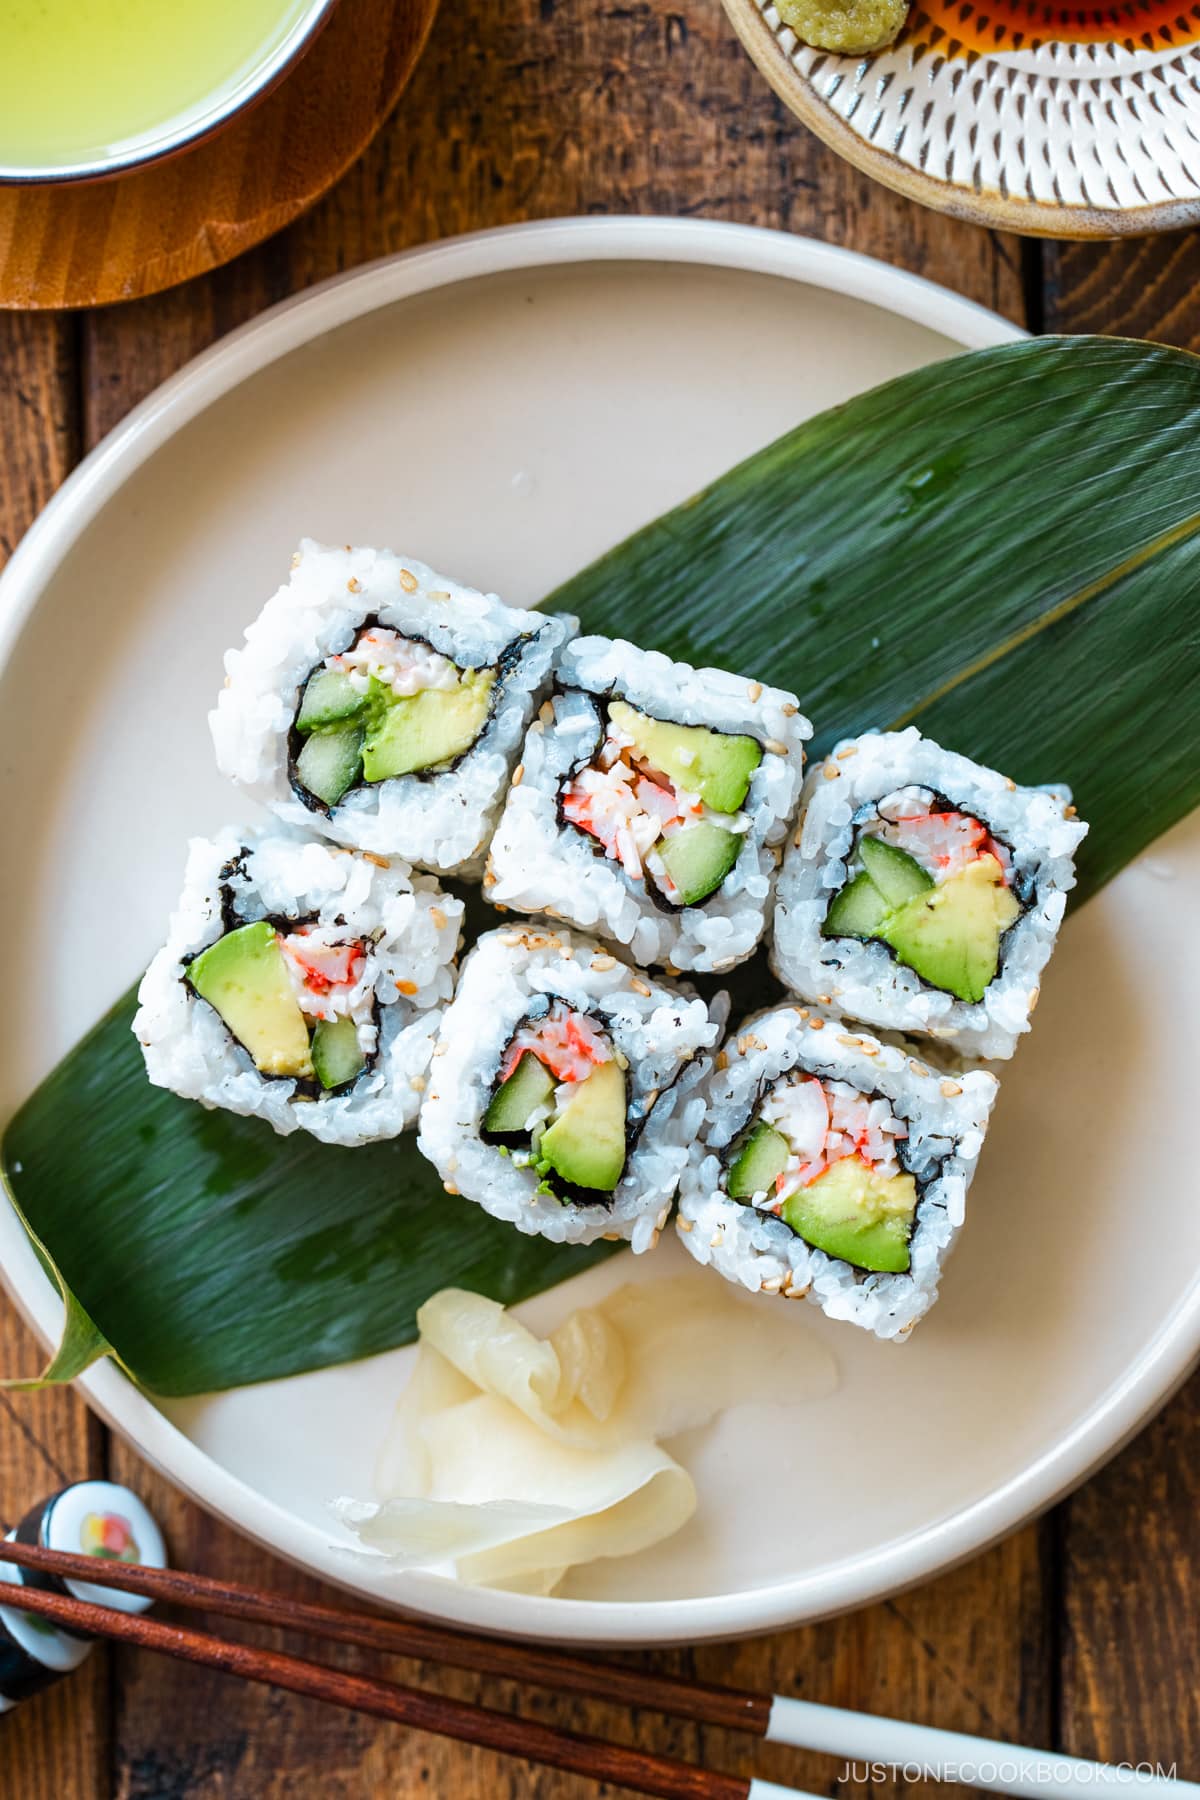 A round ceramic plate containing six pieces of California rolls over a bamboo leaf along with sushi ginger.